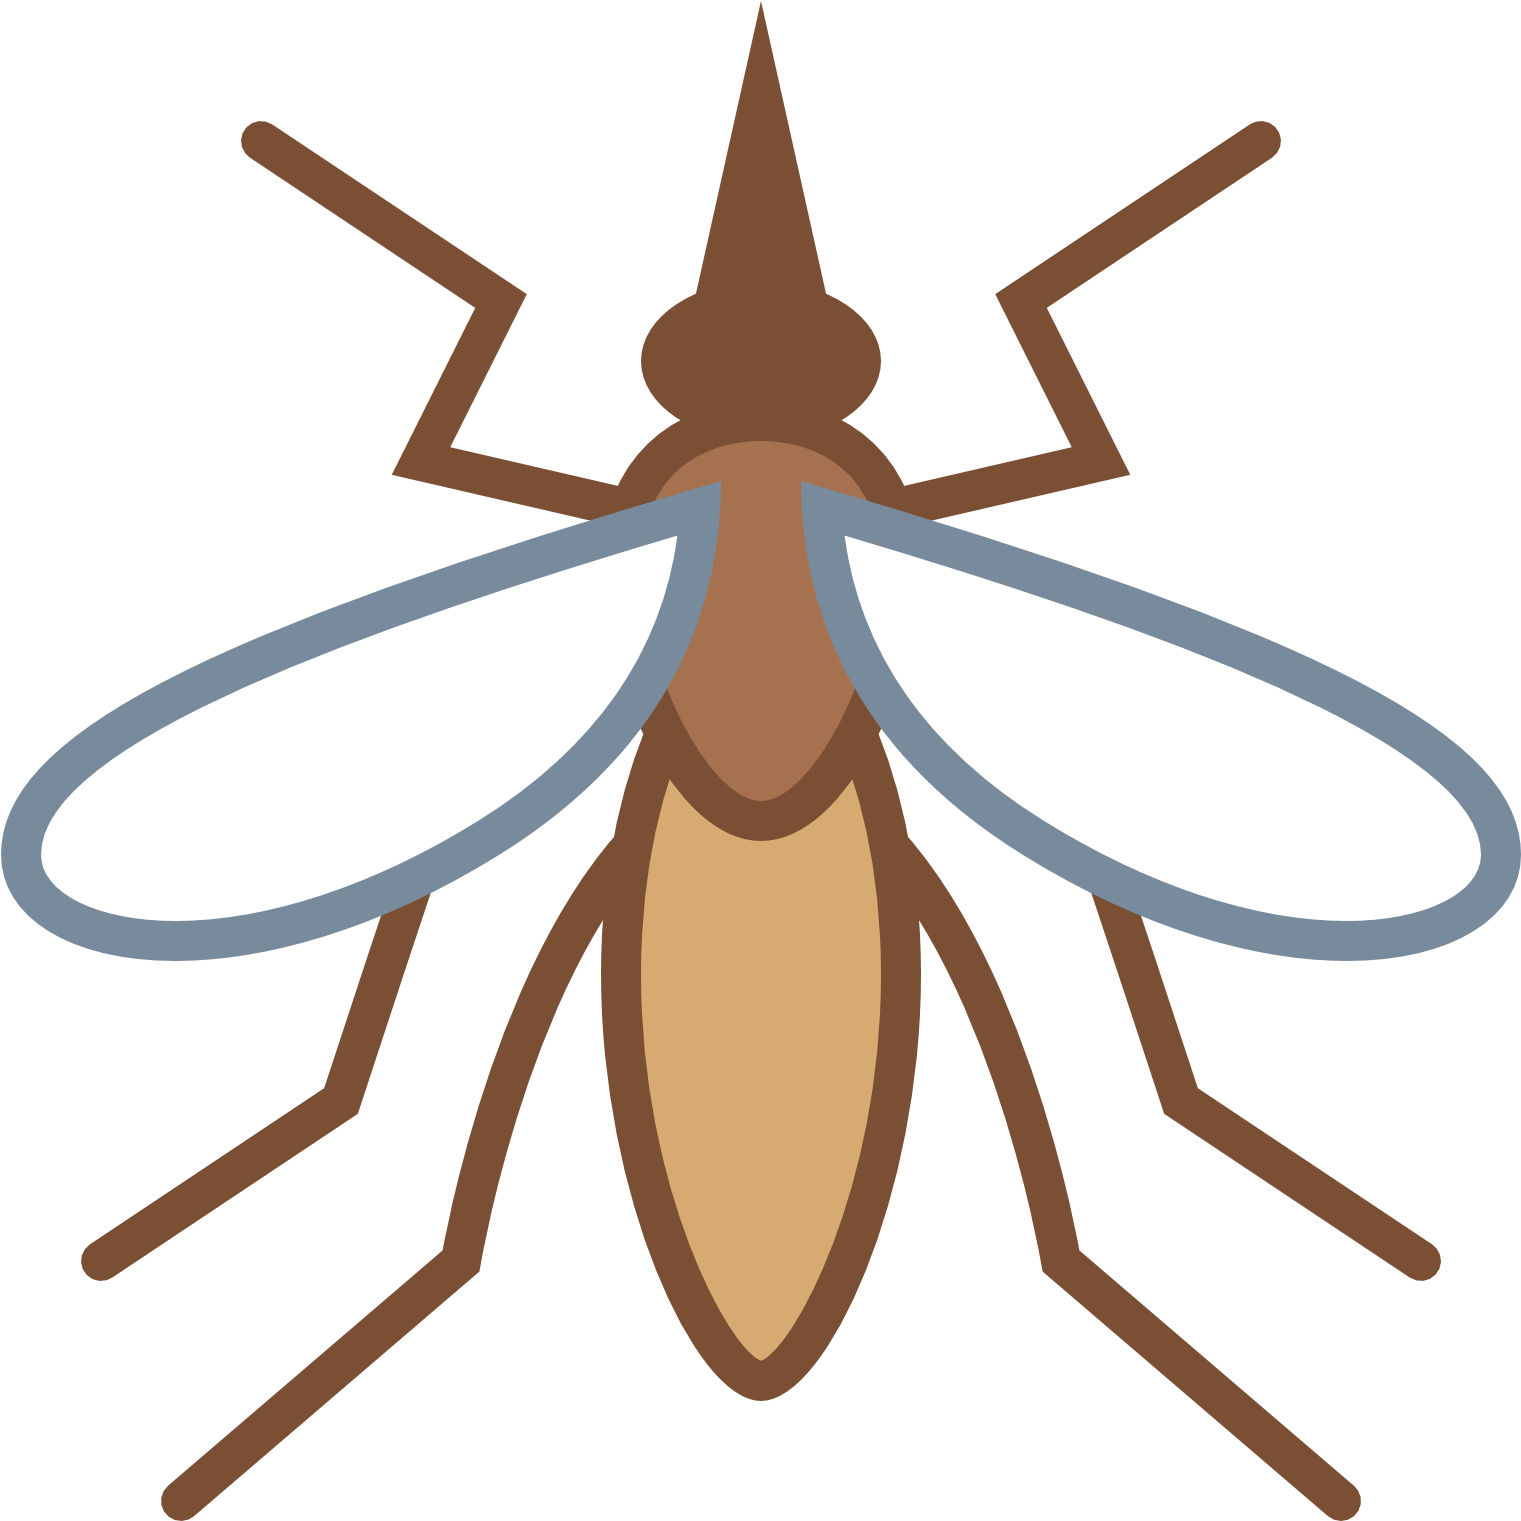 An Mosquito With Three Main Body Parts And Three Legs - Mosquito Icon Png (1600x1600)